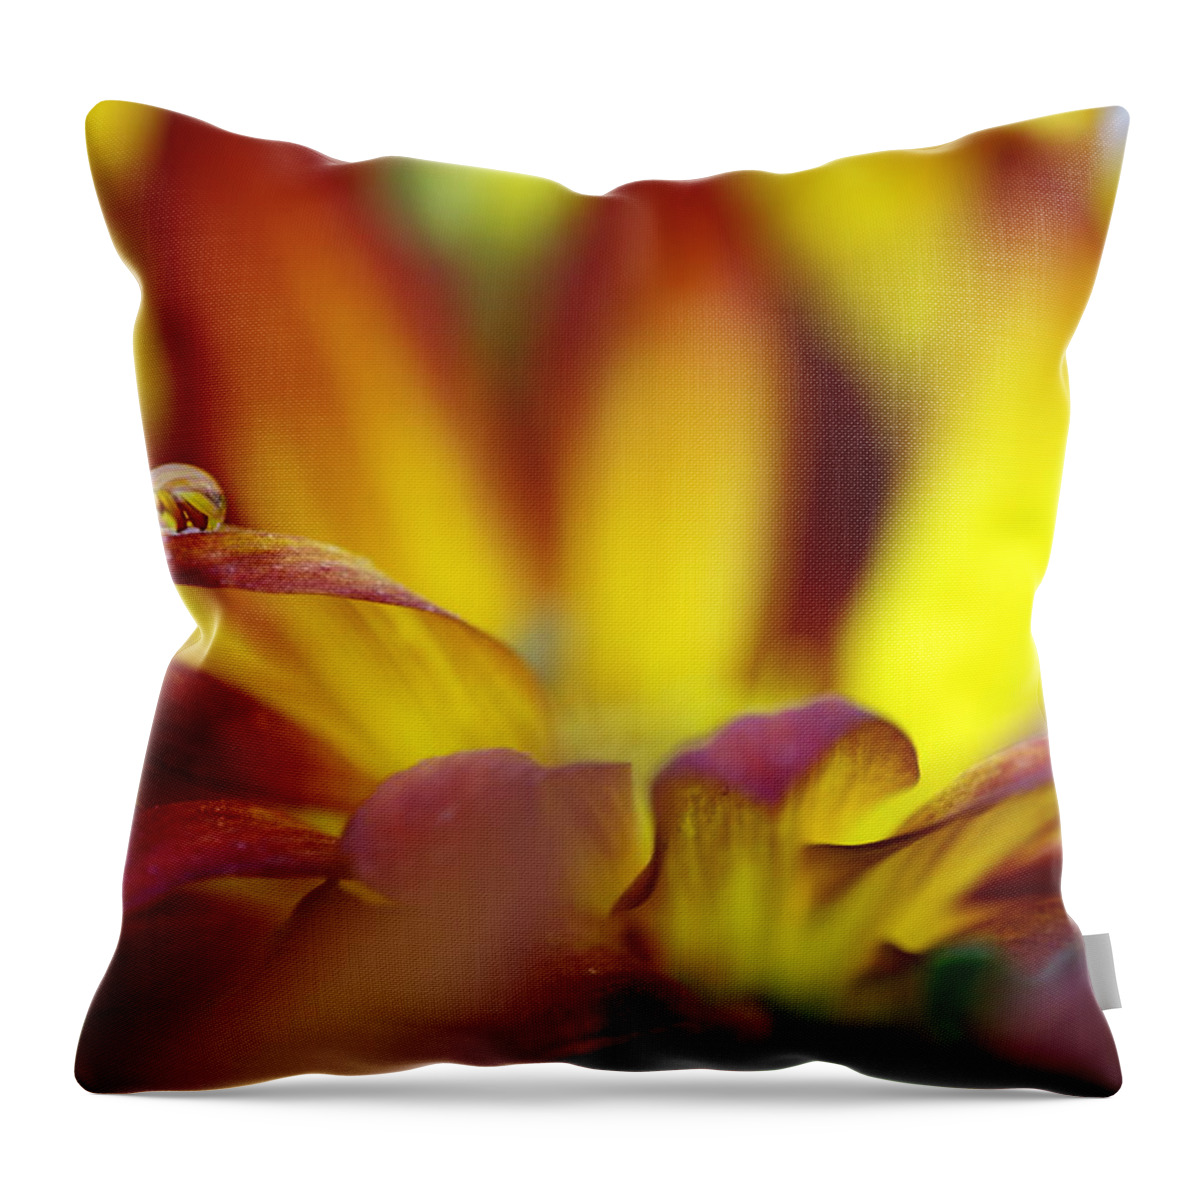 Water Drop Throw Pillow featuring the photograph Water Drop by Andreas Freund